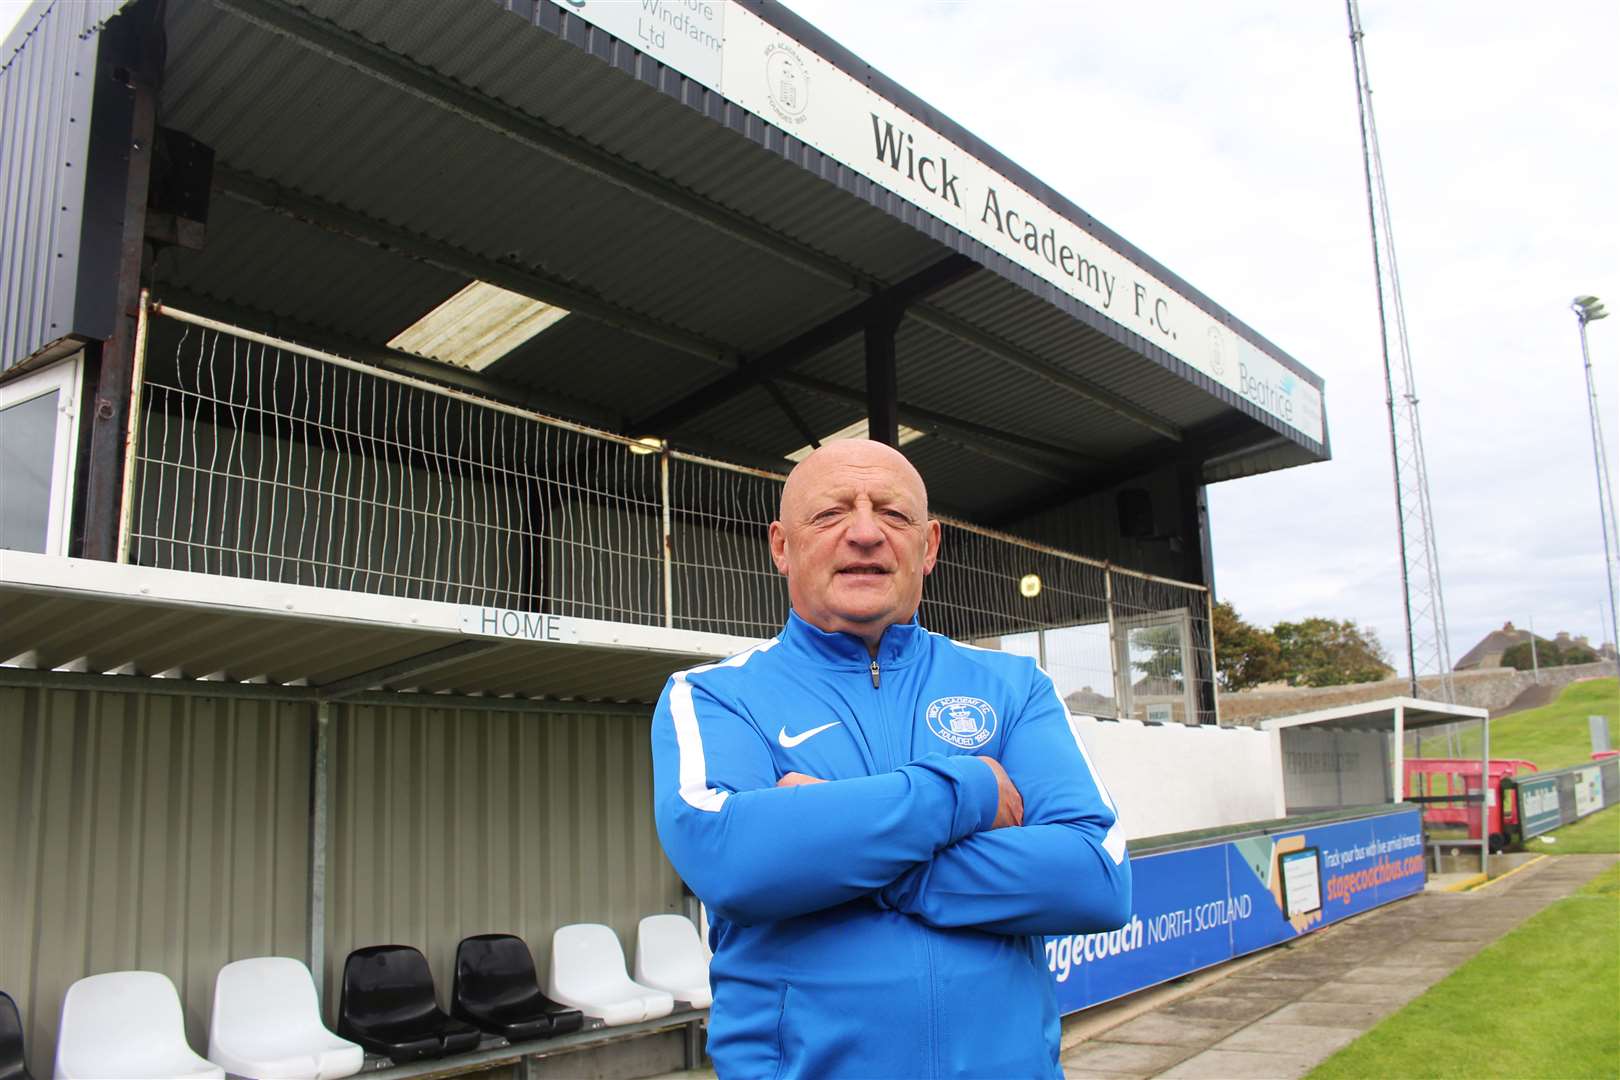 Pat Miller is the new chairman of Wick Academy.